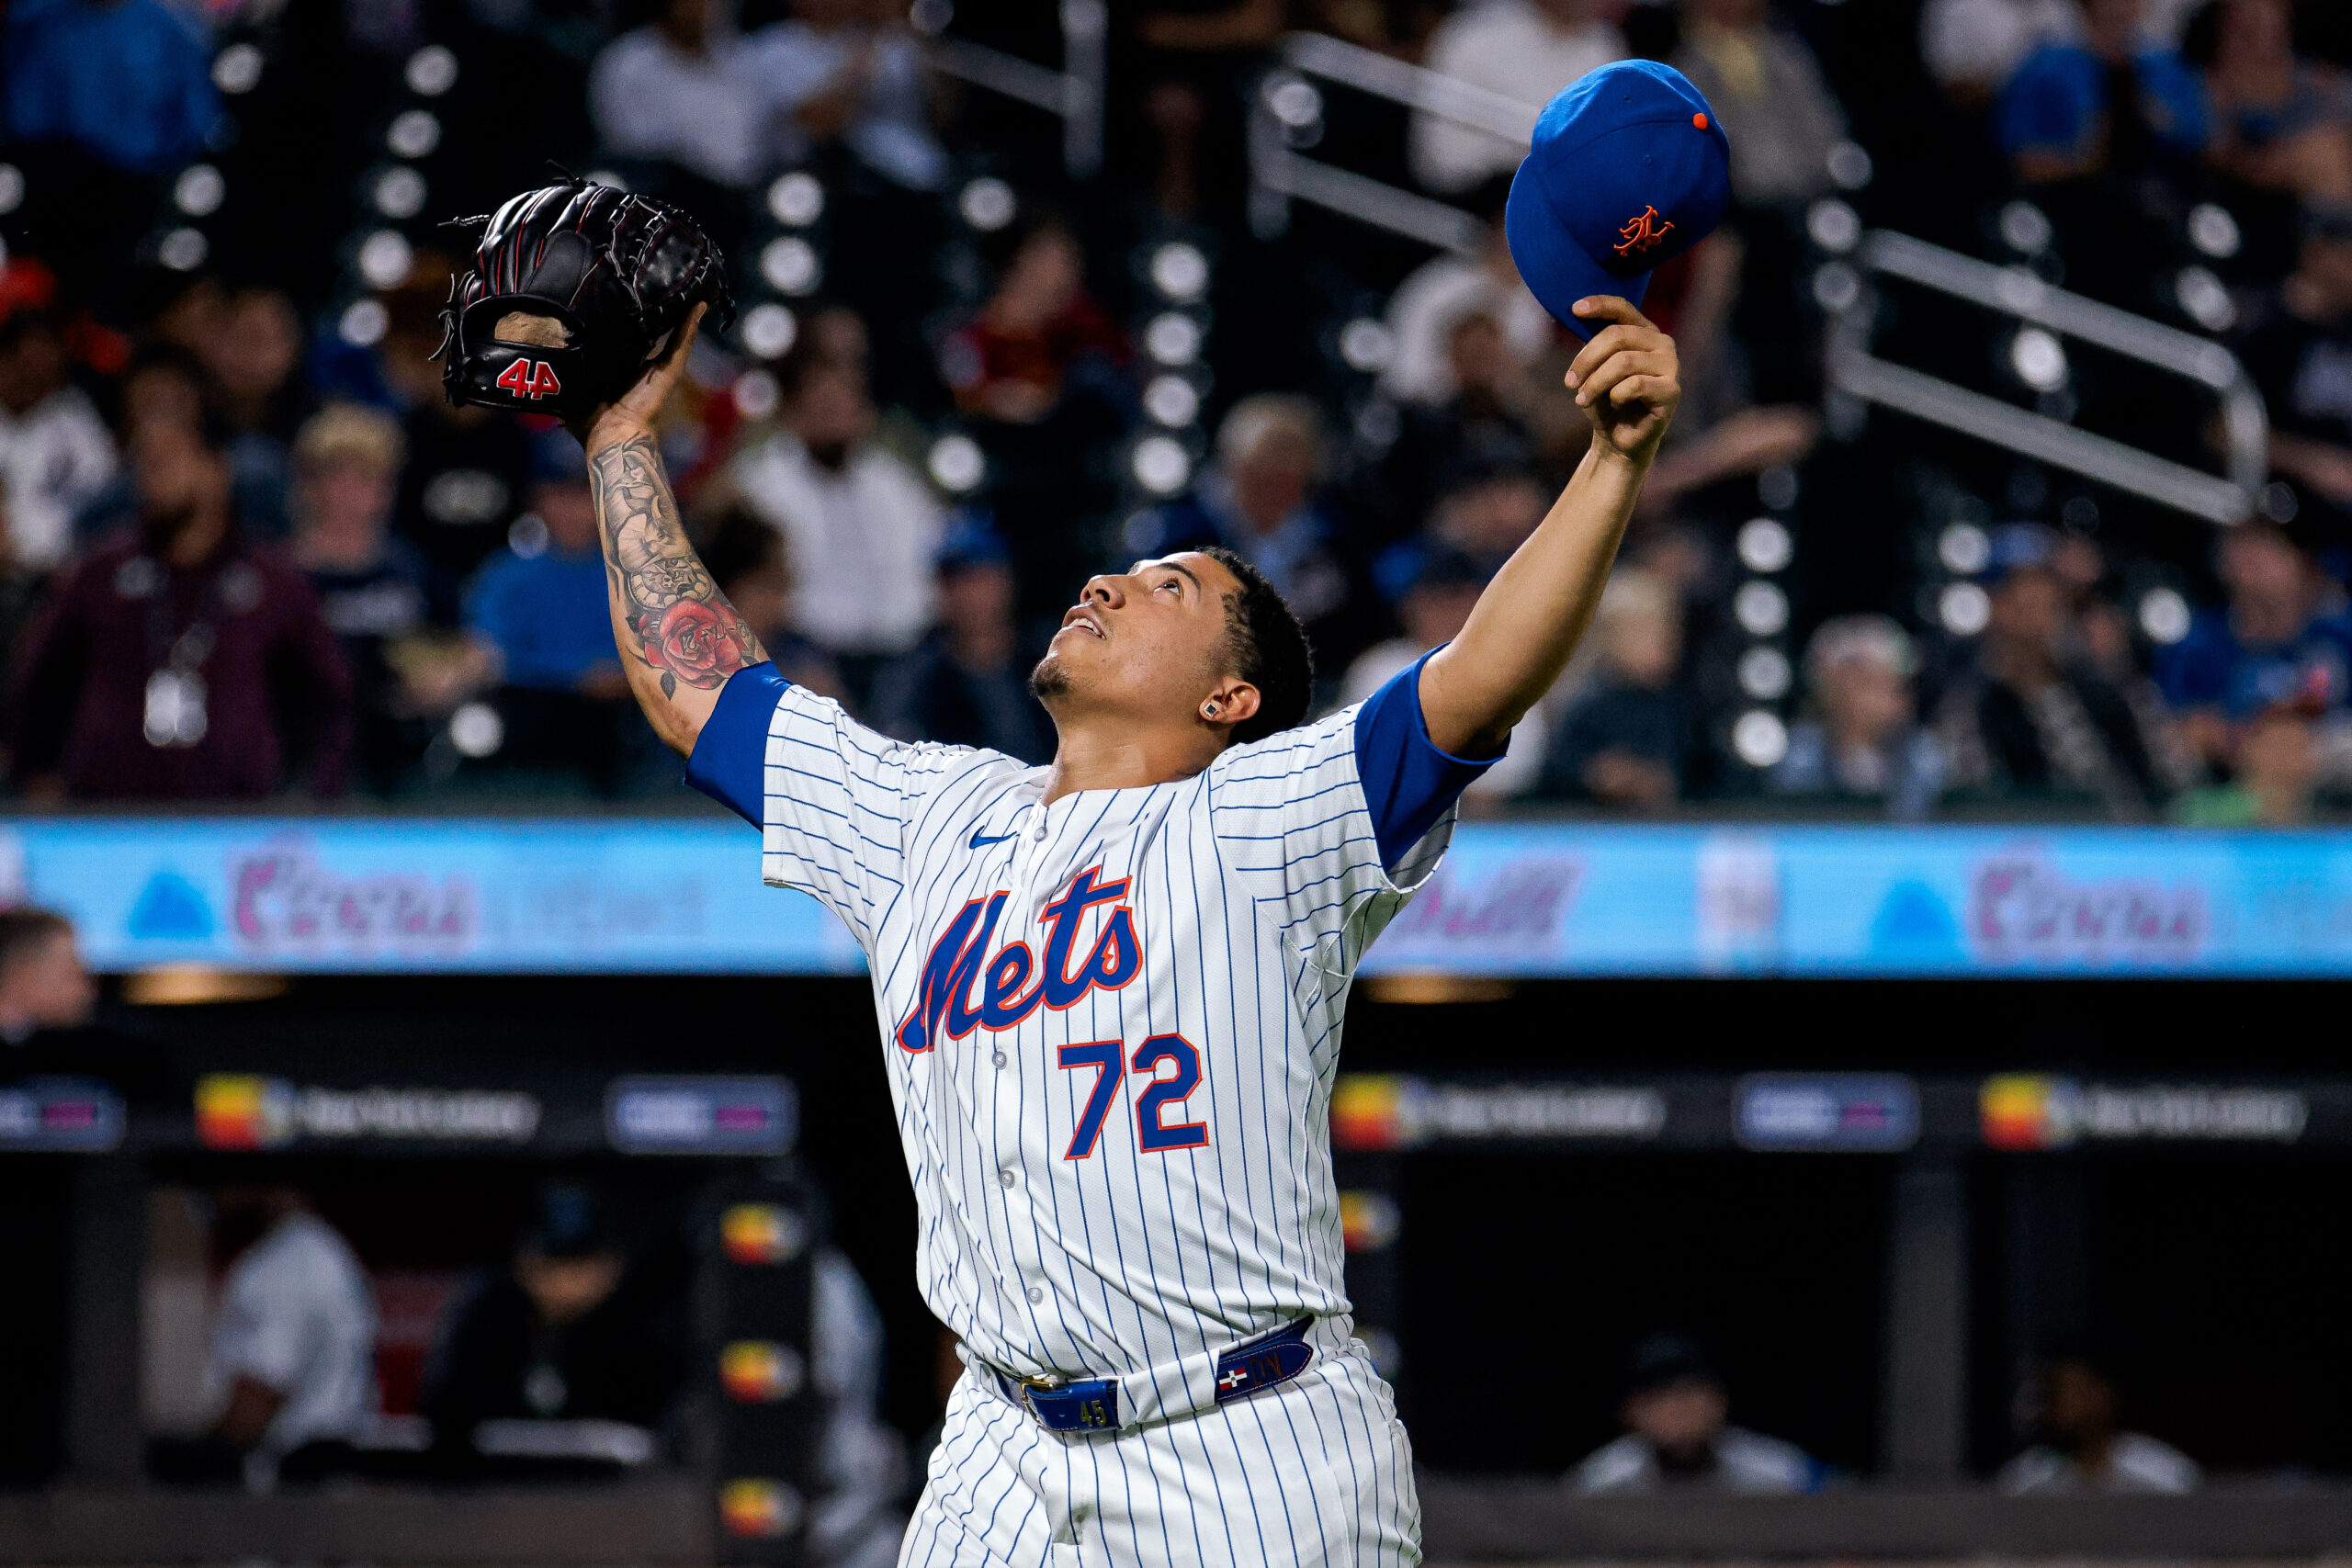 Morning briefing: Mets even series with full bullpen